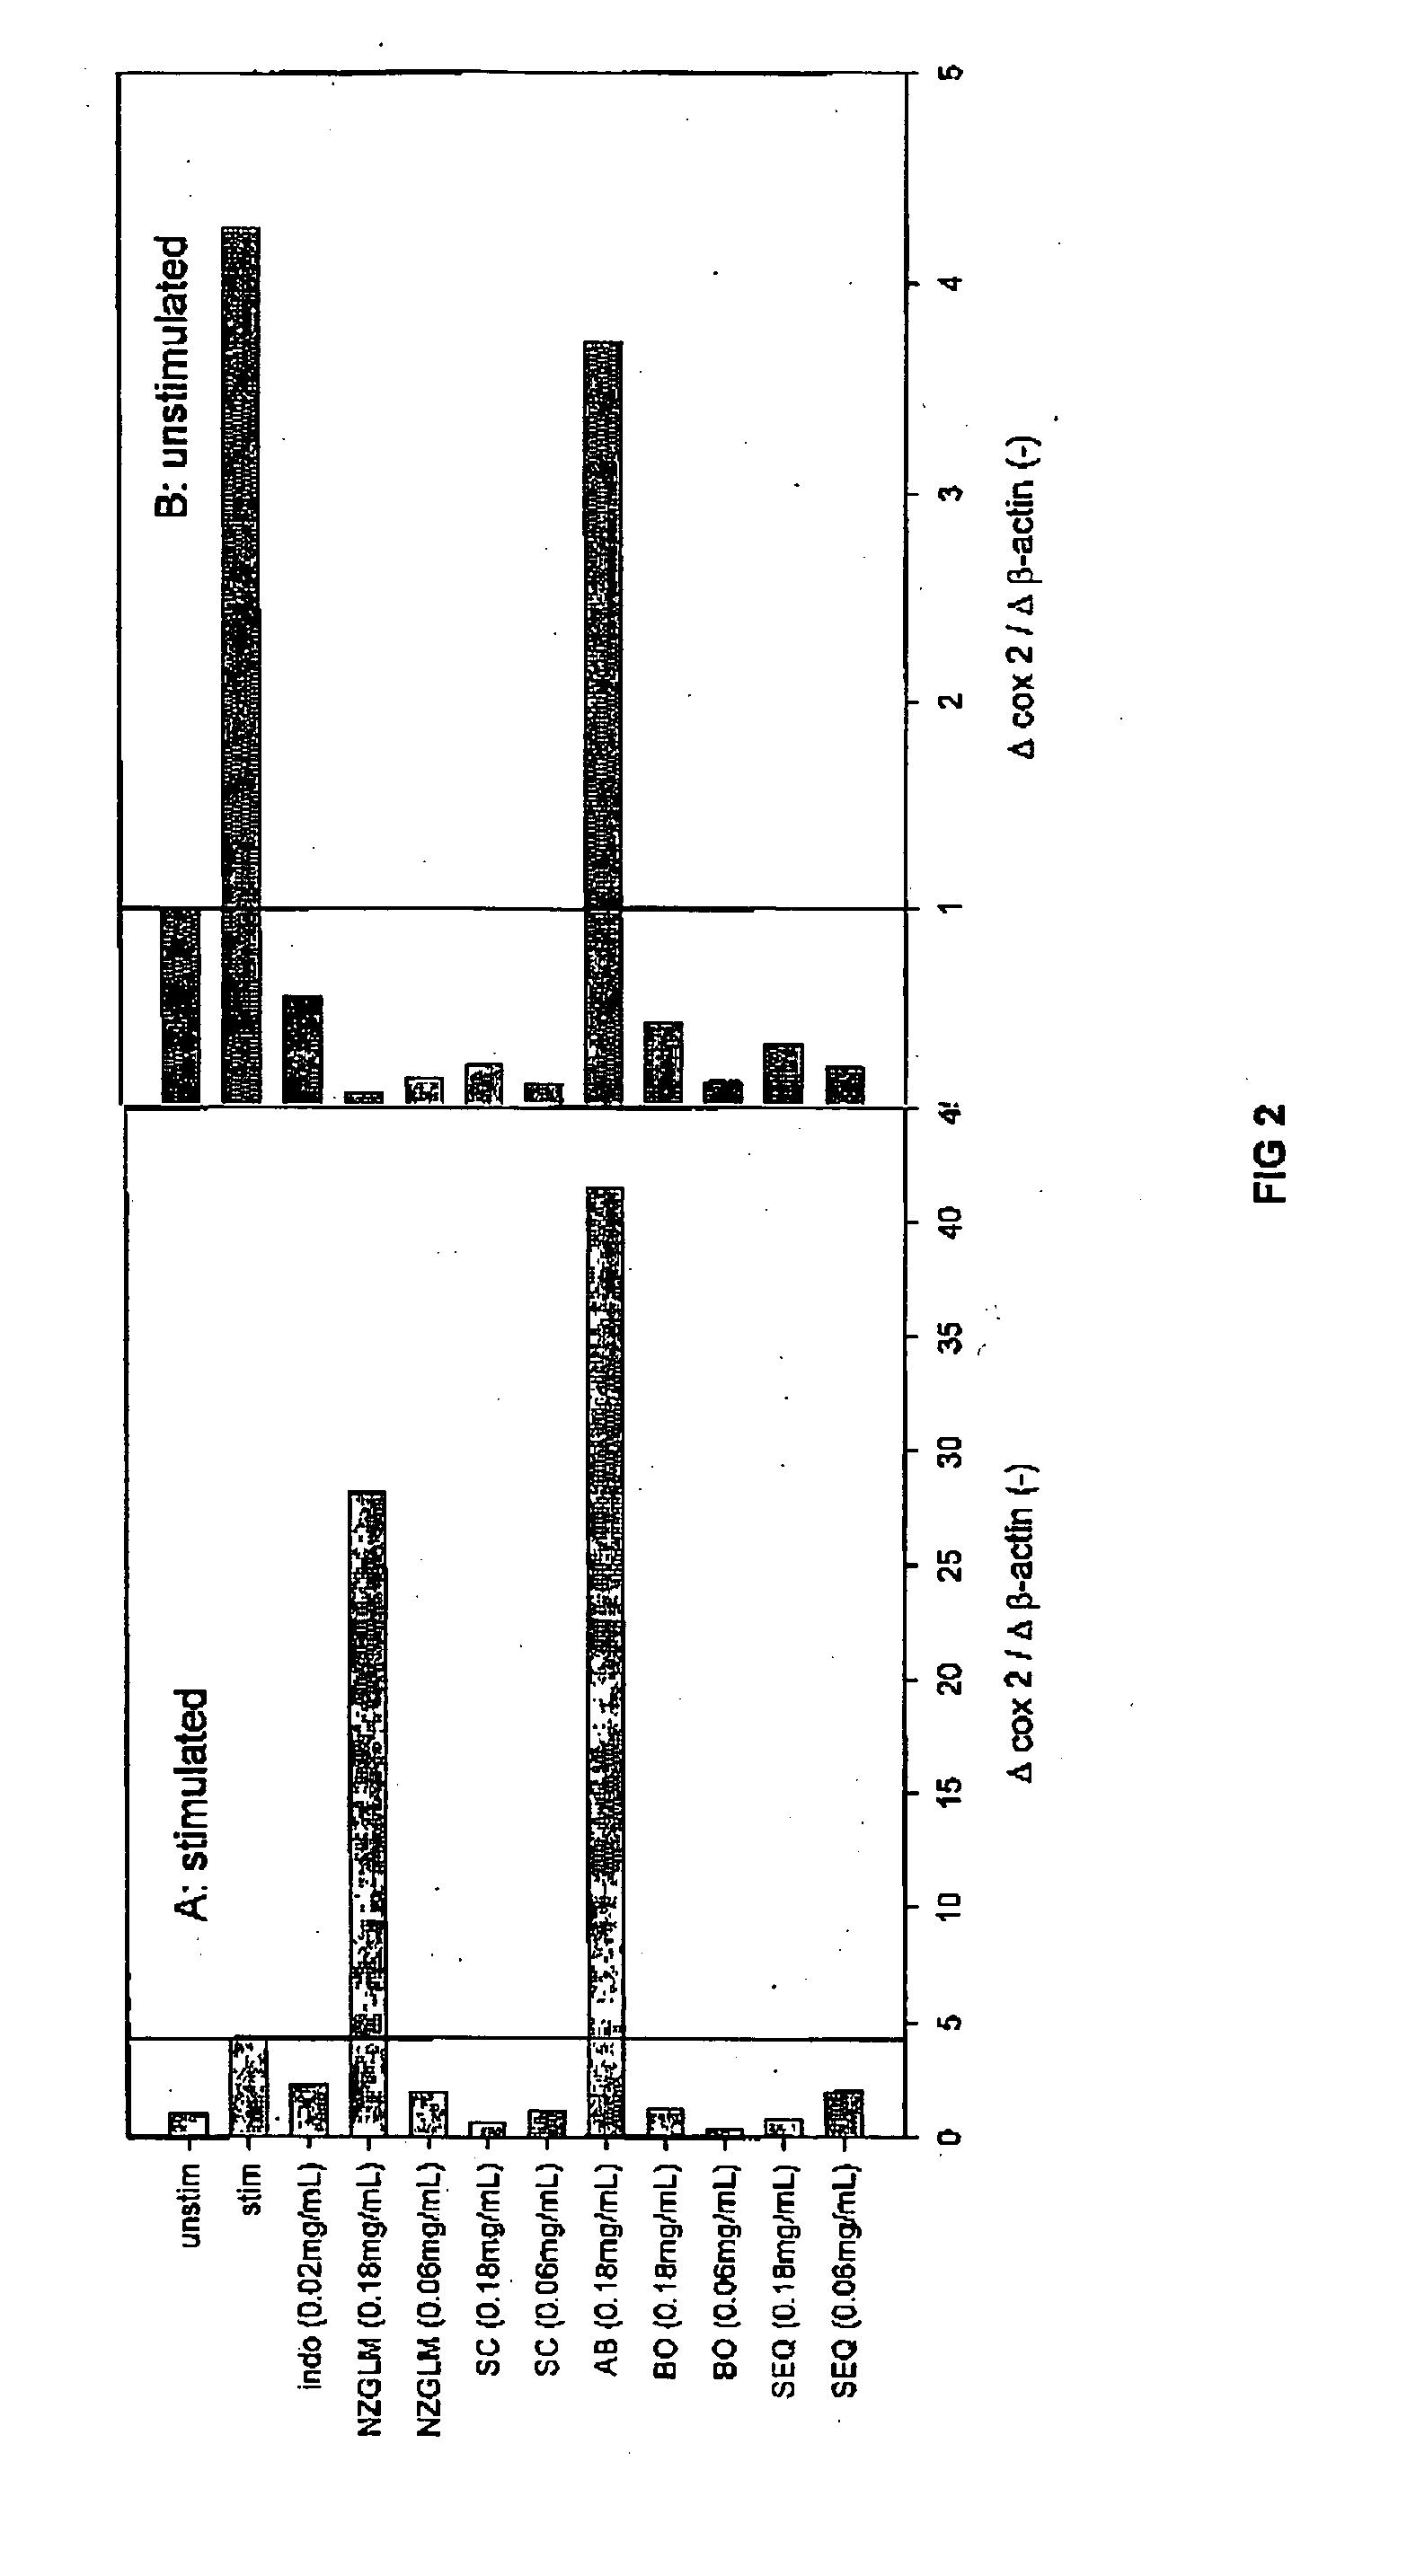 Nutraceutical composition and methods of use